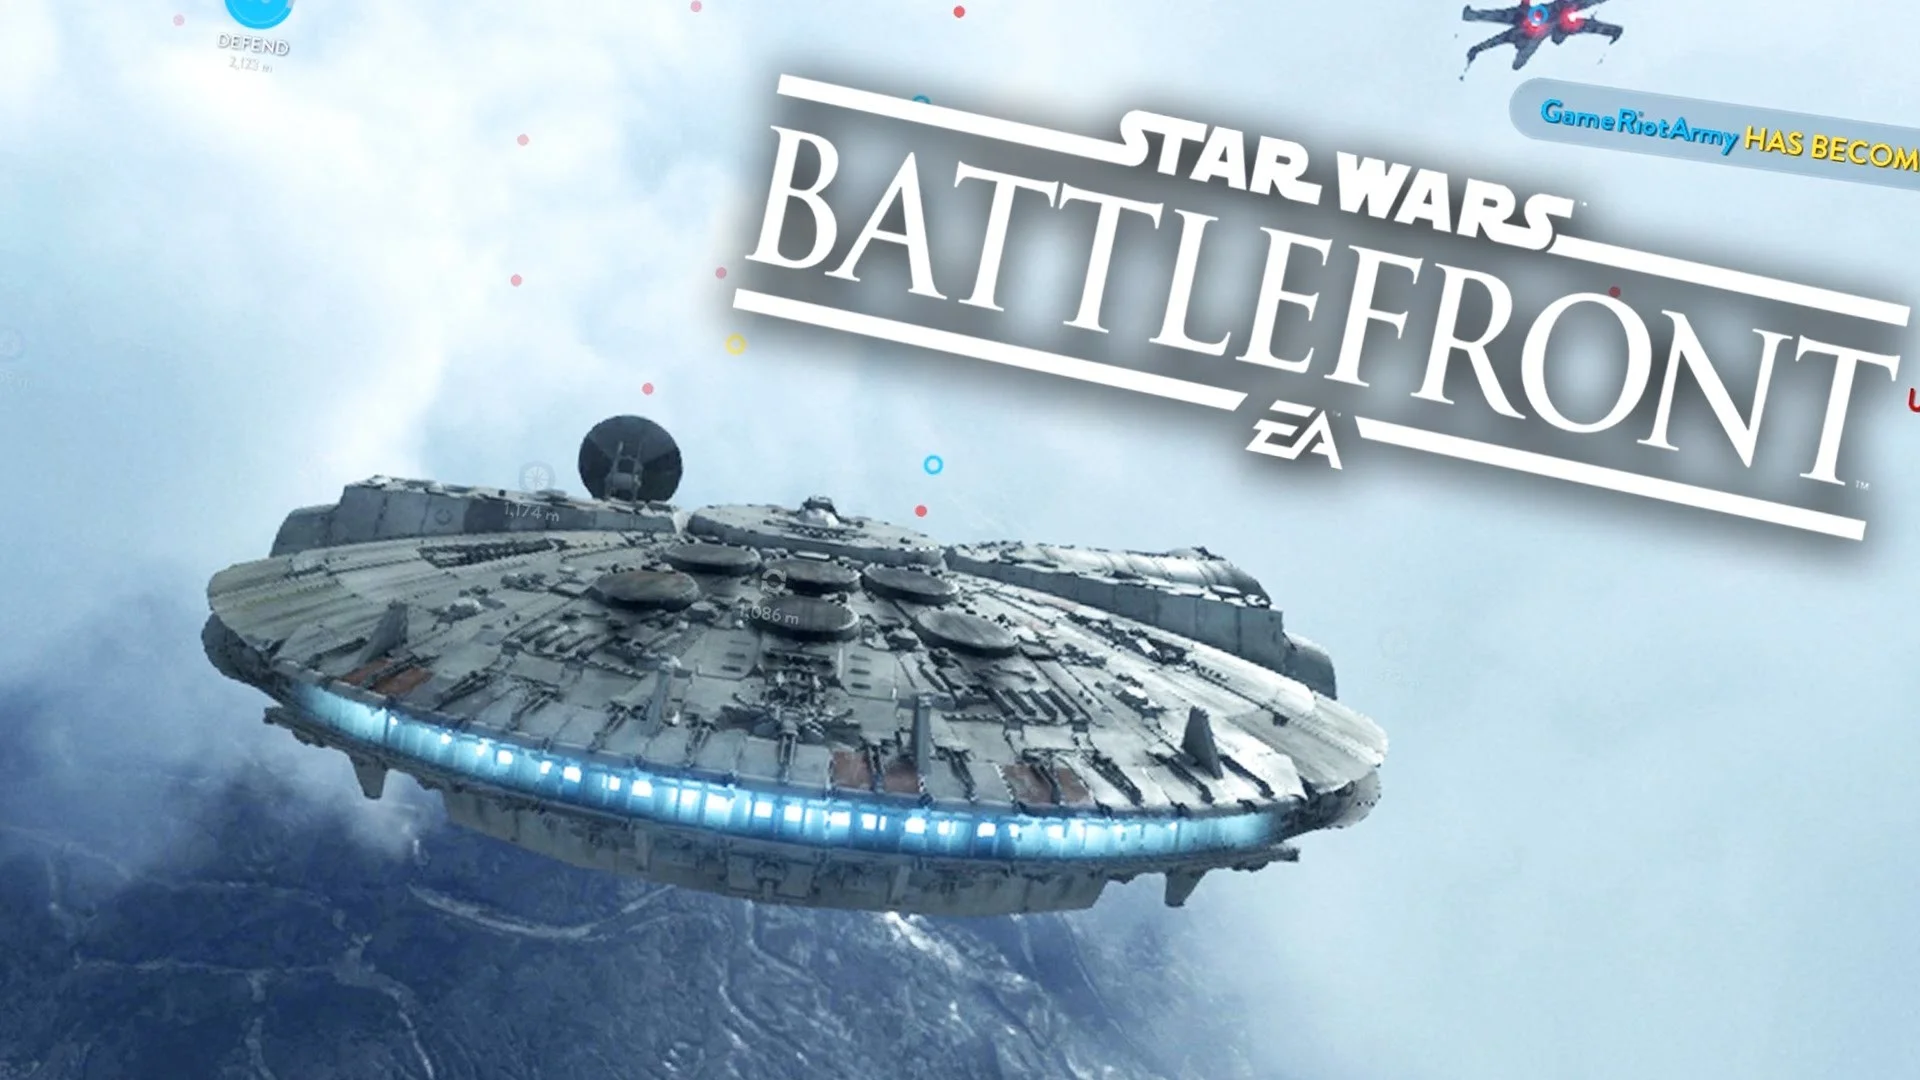 MILLENNIUM FALCON – Star Wars Battlefront Gameplay – Fight Squadron – YouTube